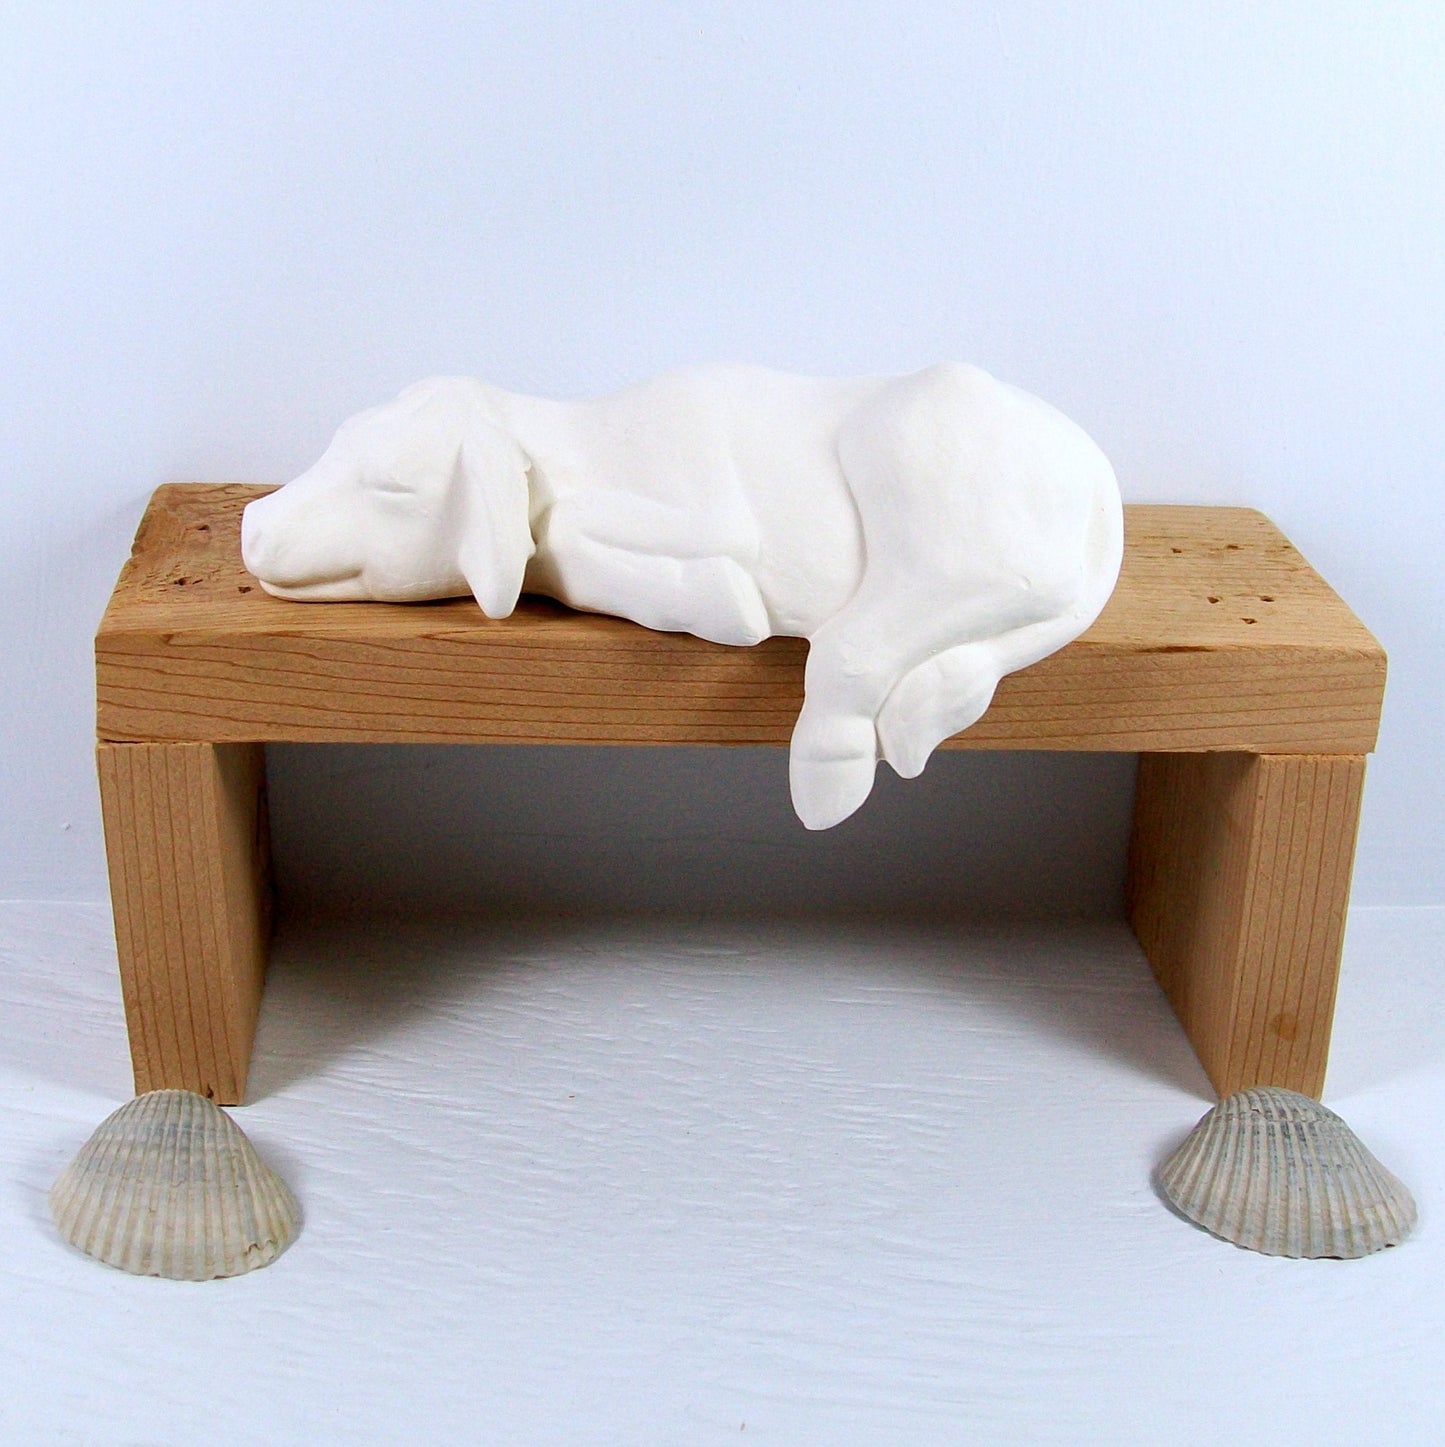 Small handmade ready to paint ceramic sleepy shelf cow with left rear leg and tail hanging over the brown wood display bench.  The background is pale blue and there are 2 sea shells on the table.